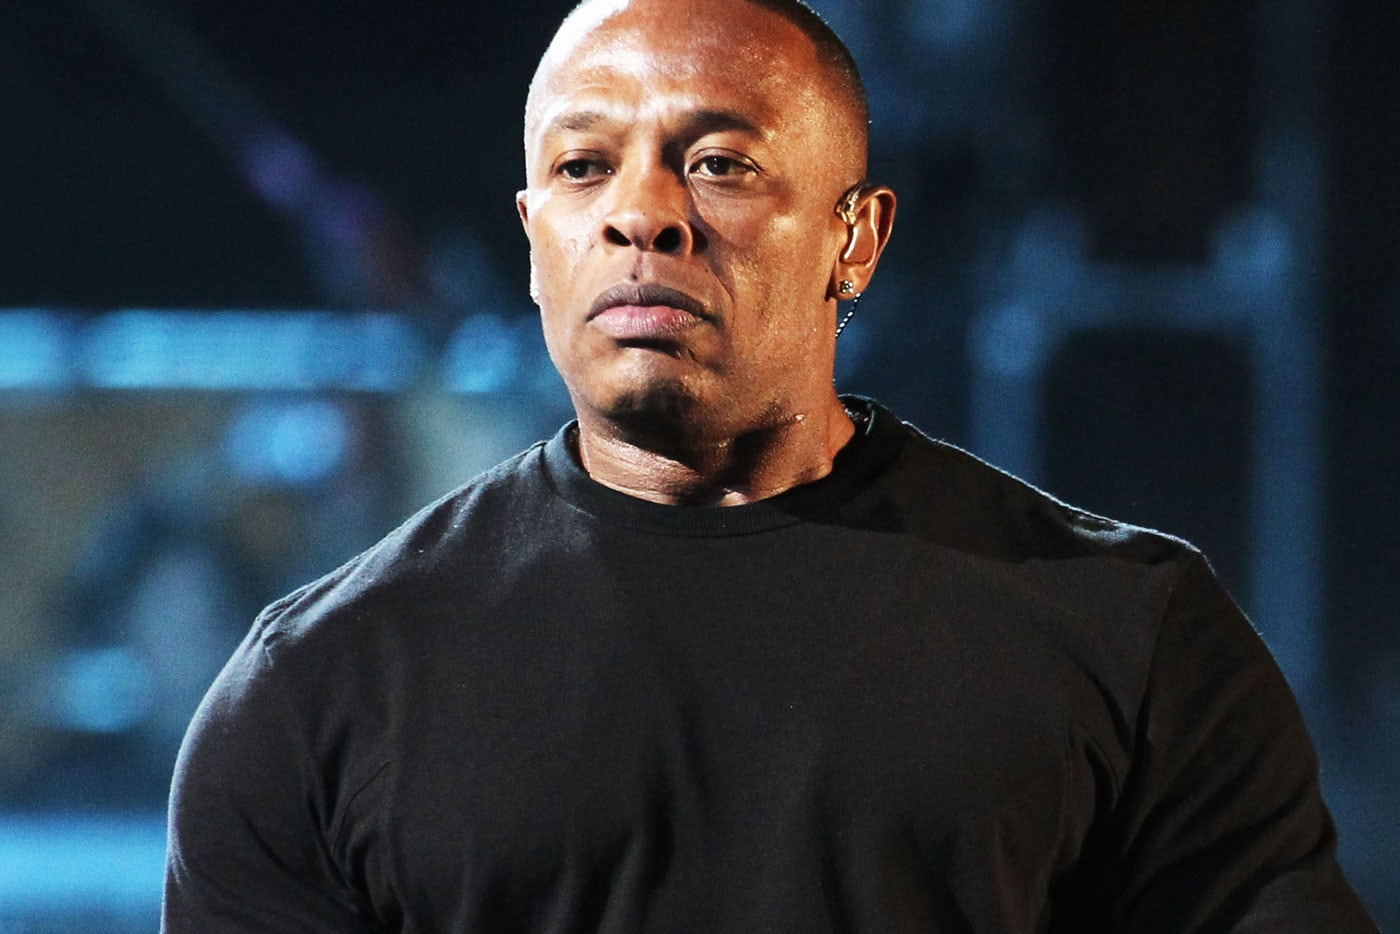 European Tour With Dr. Dre, Snoop, Eminem and Kendrick Lamar Coming Soon?